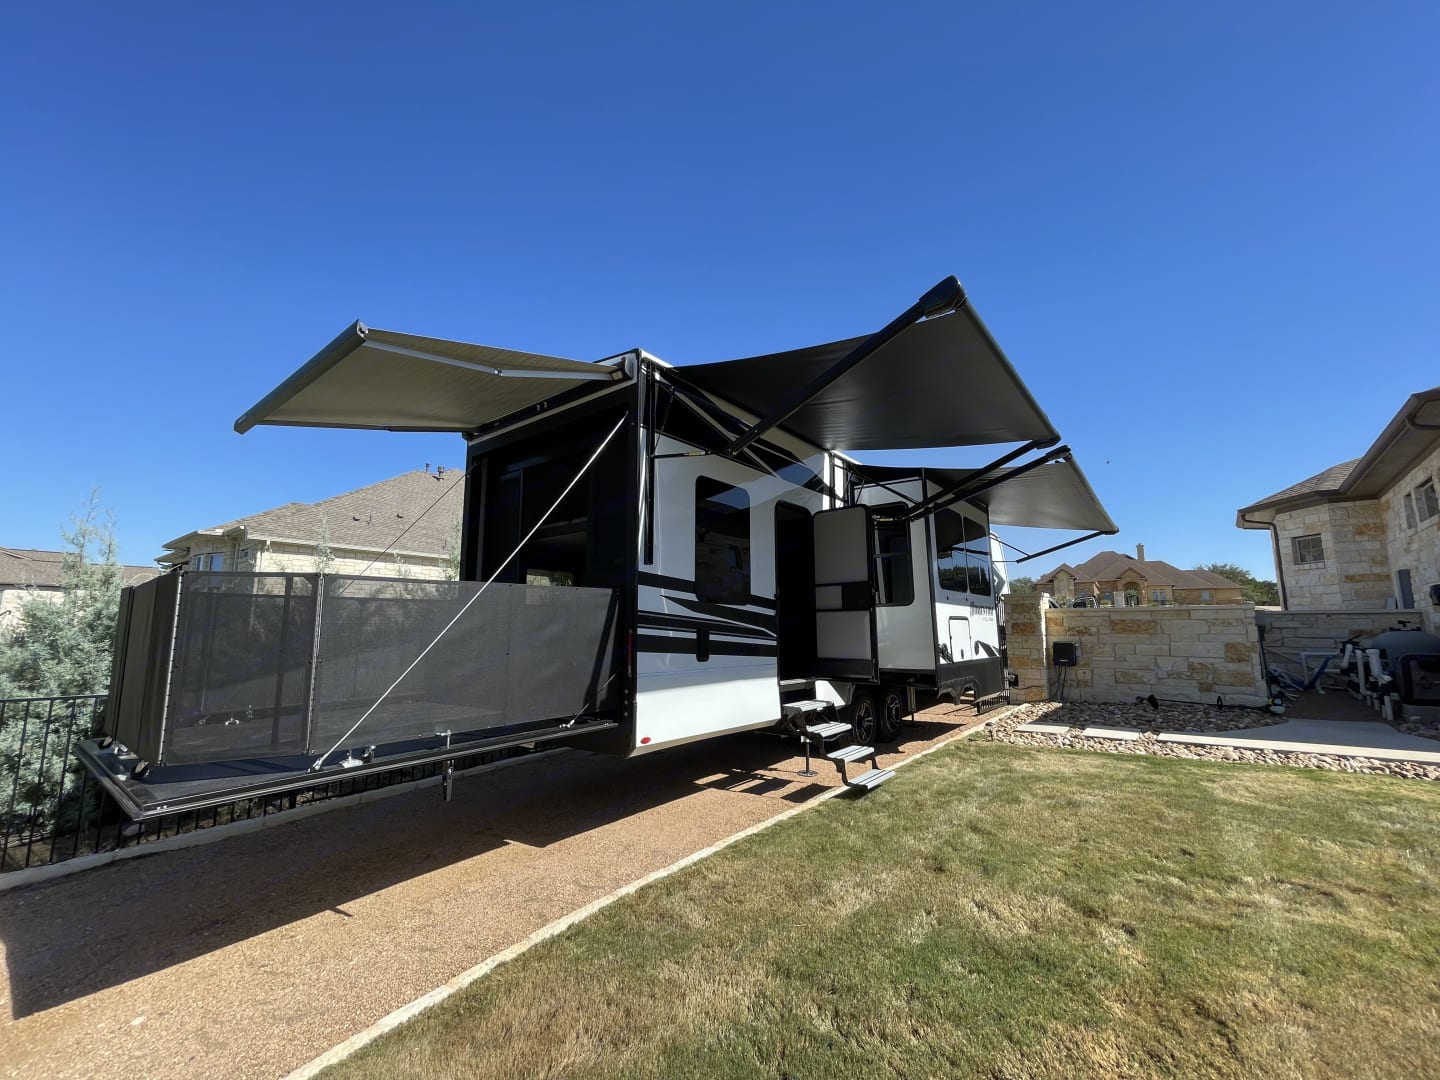 Fifth wheel camper for rent in Texas Hill Country